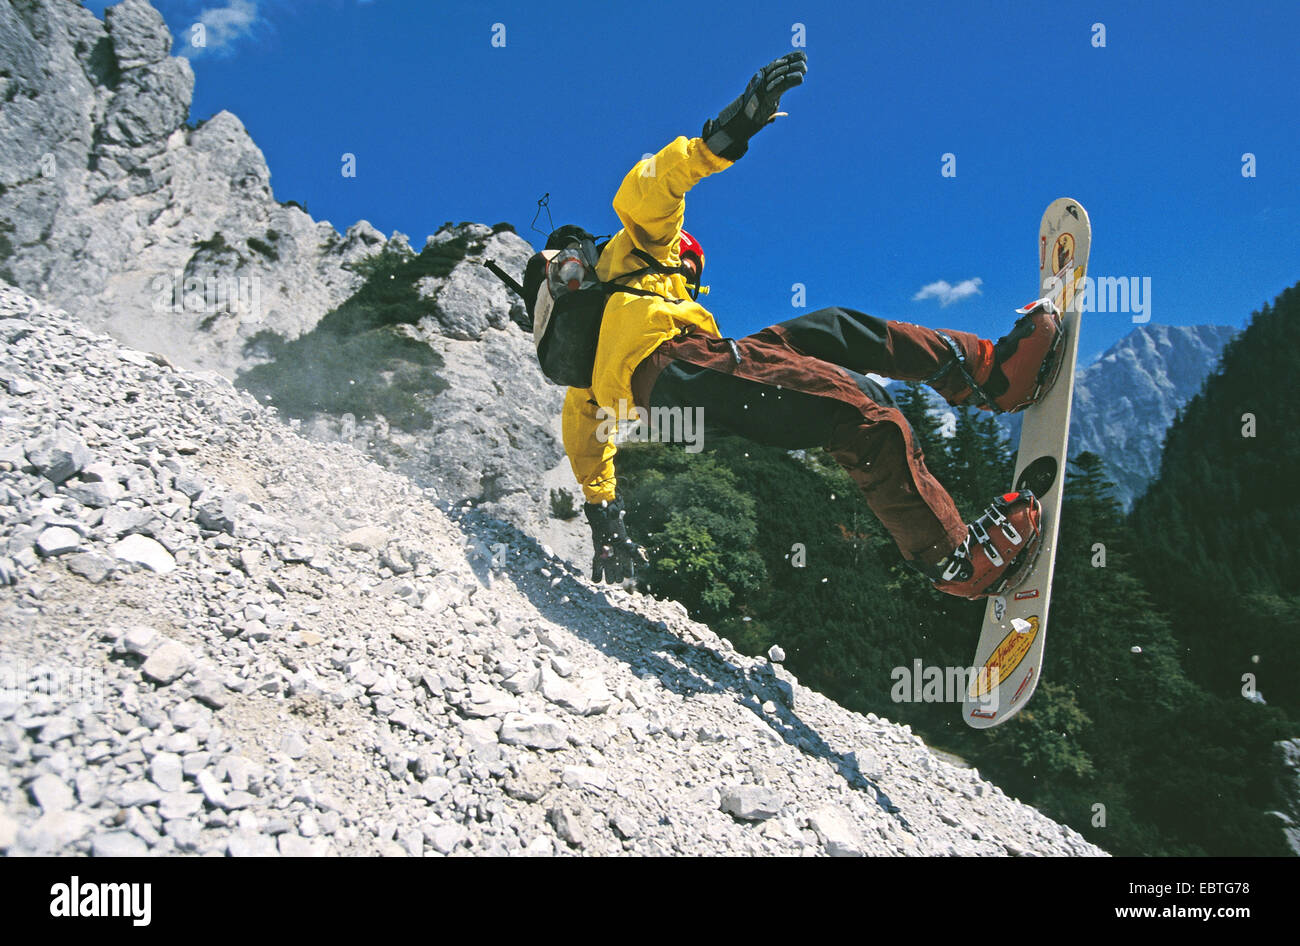 man falling while 'rockboarding' in the mountains (going down a gravel slope on a snowboard) Stock Photo